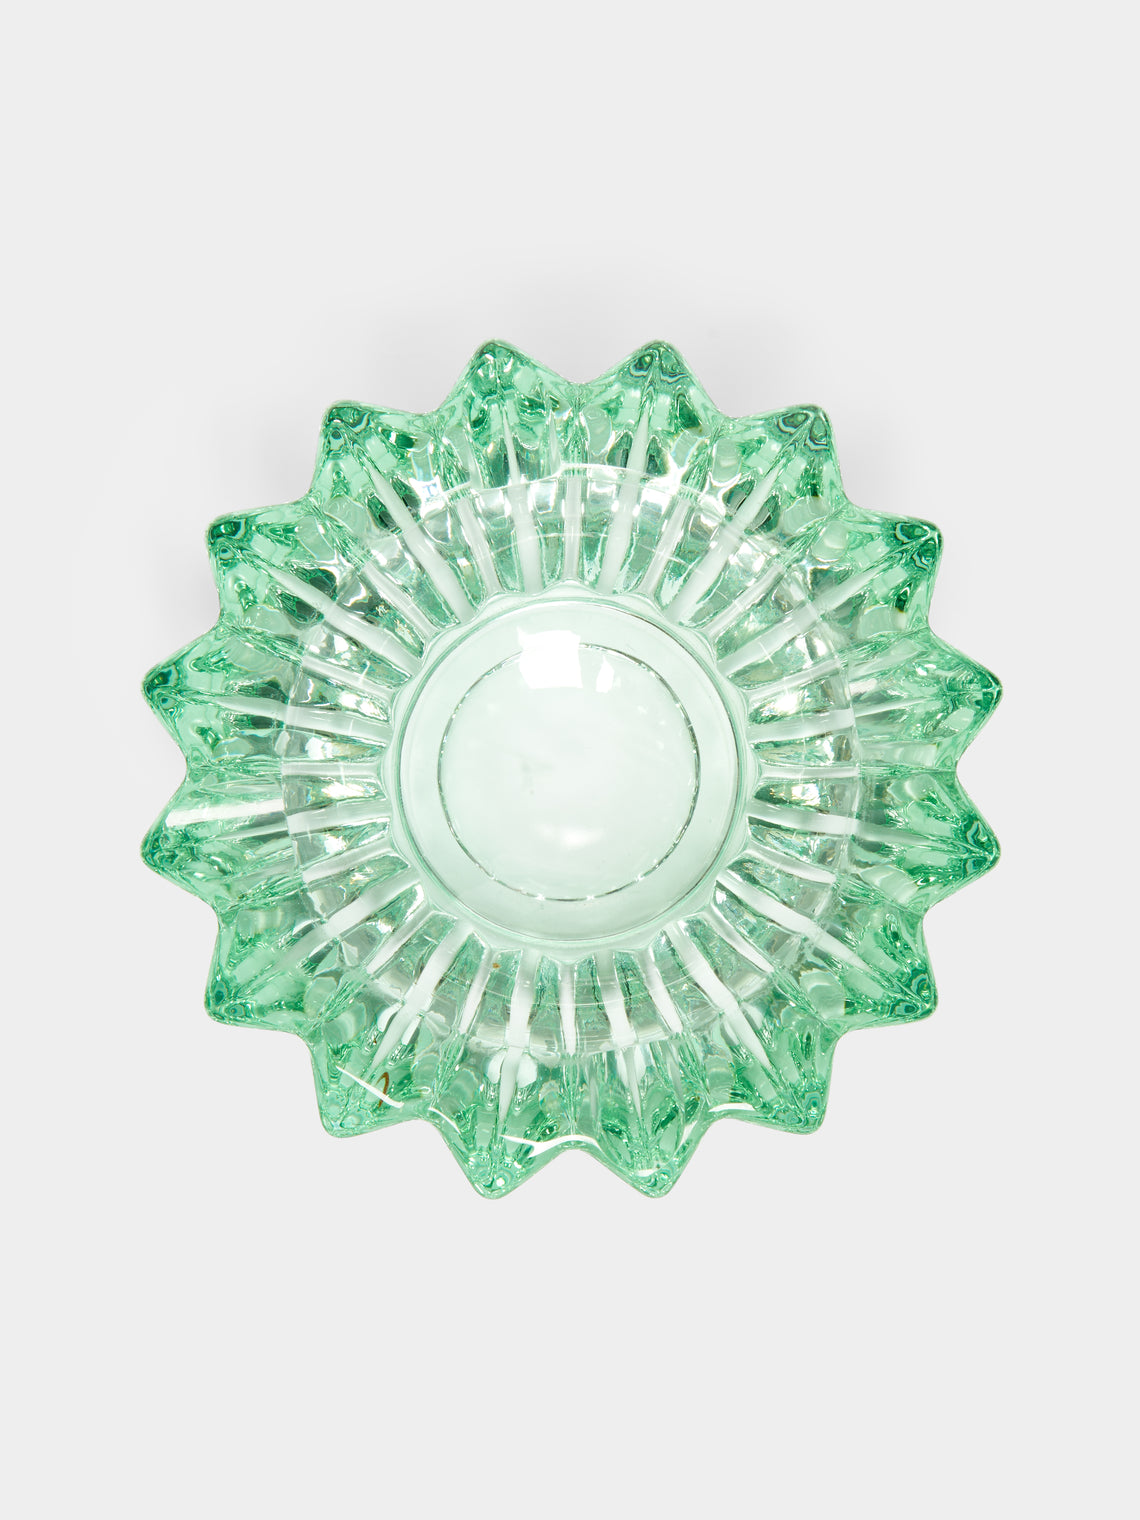 Antique and Vintage - 1920s Glass Ashtray -  - ABASK